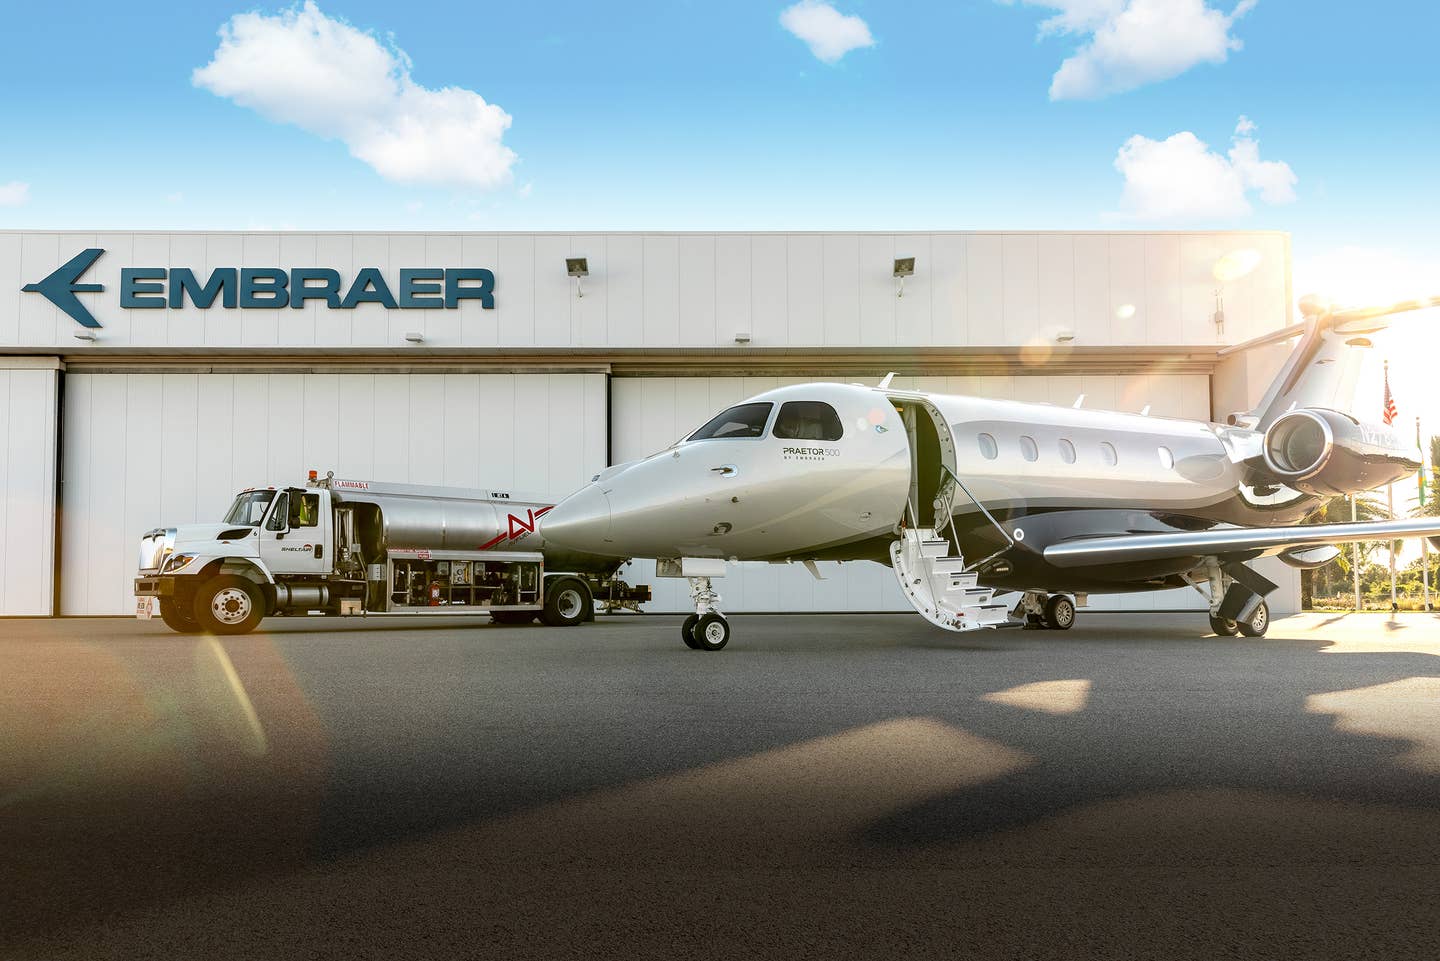 Embraer Partners With Avfuel to Increase SAF Use in Orlando